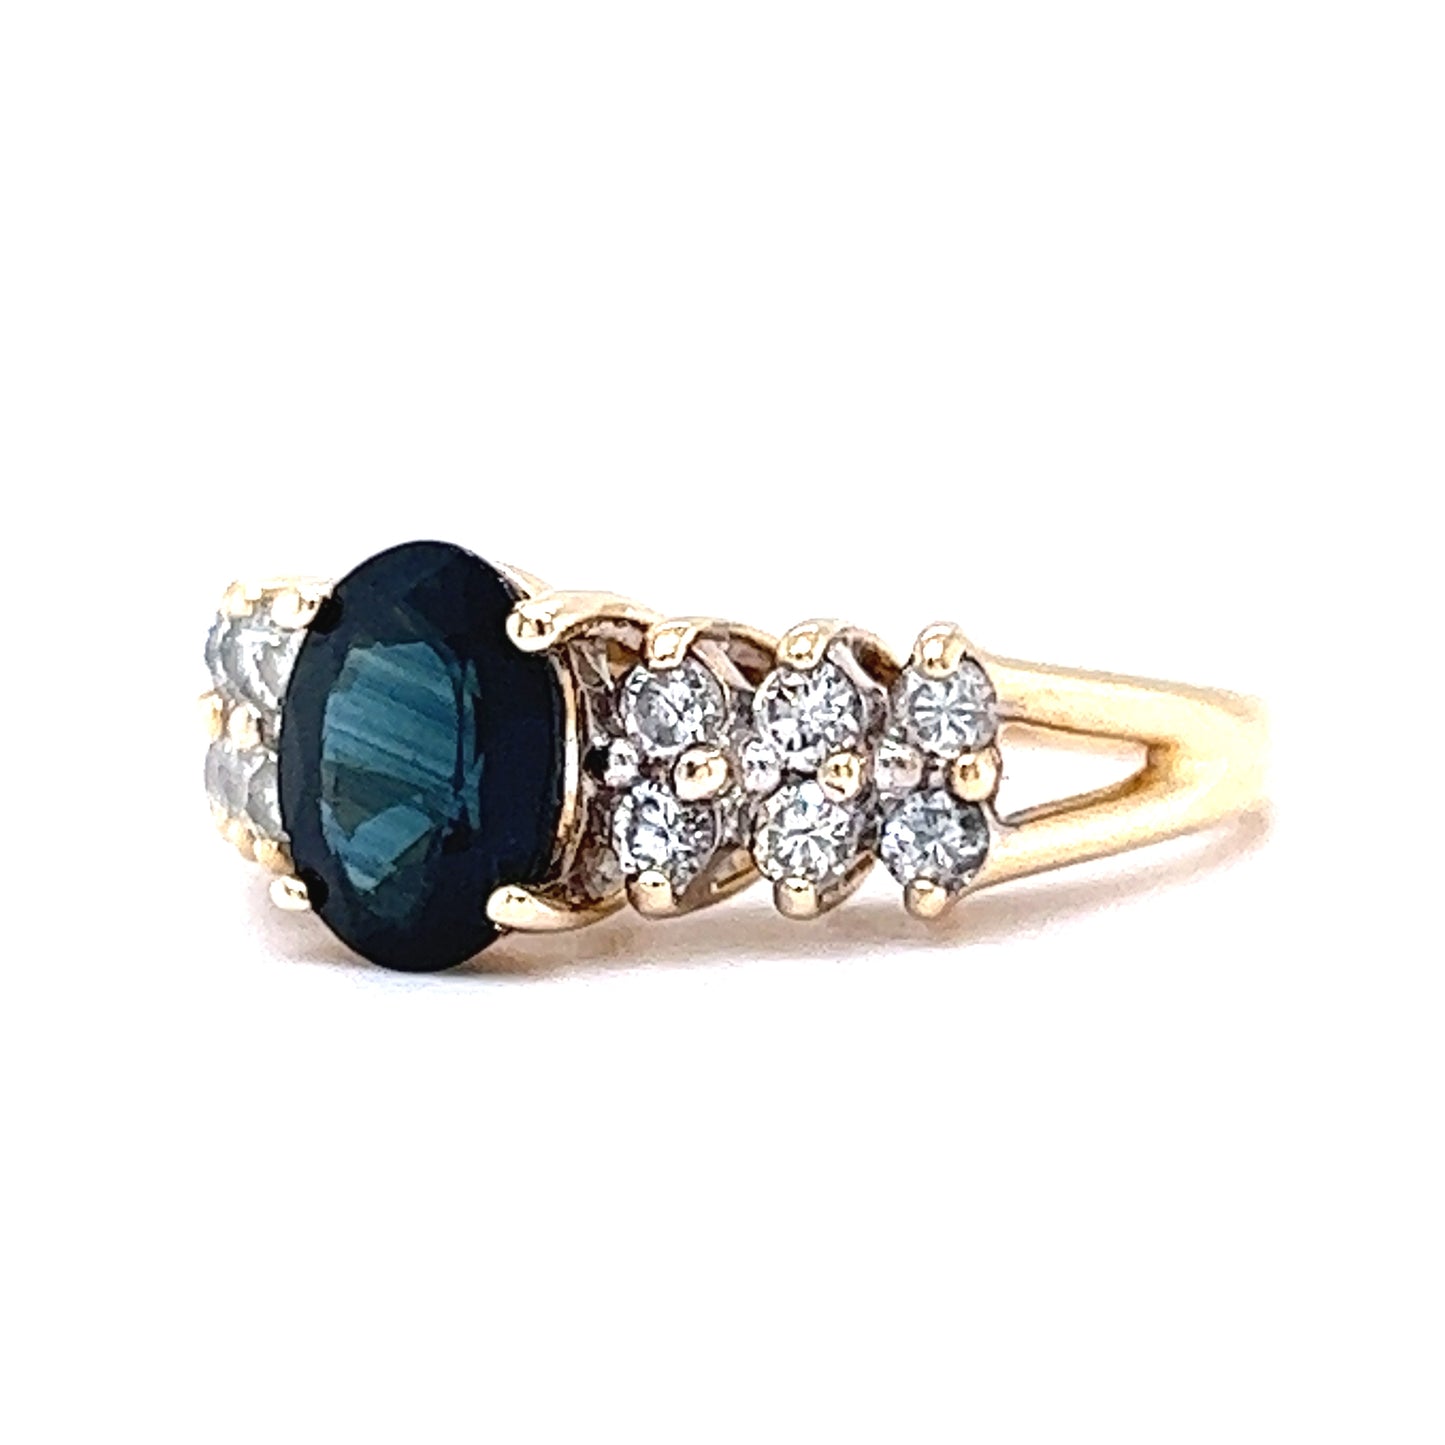 1.41 Oval Cut Sapphire Engagement Ring in 14k Yellow Gold